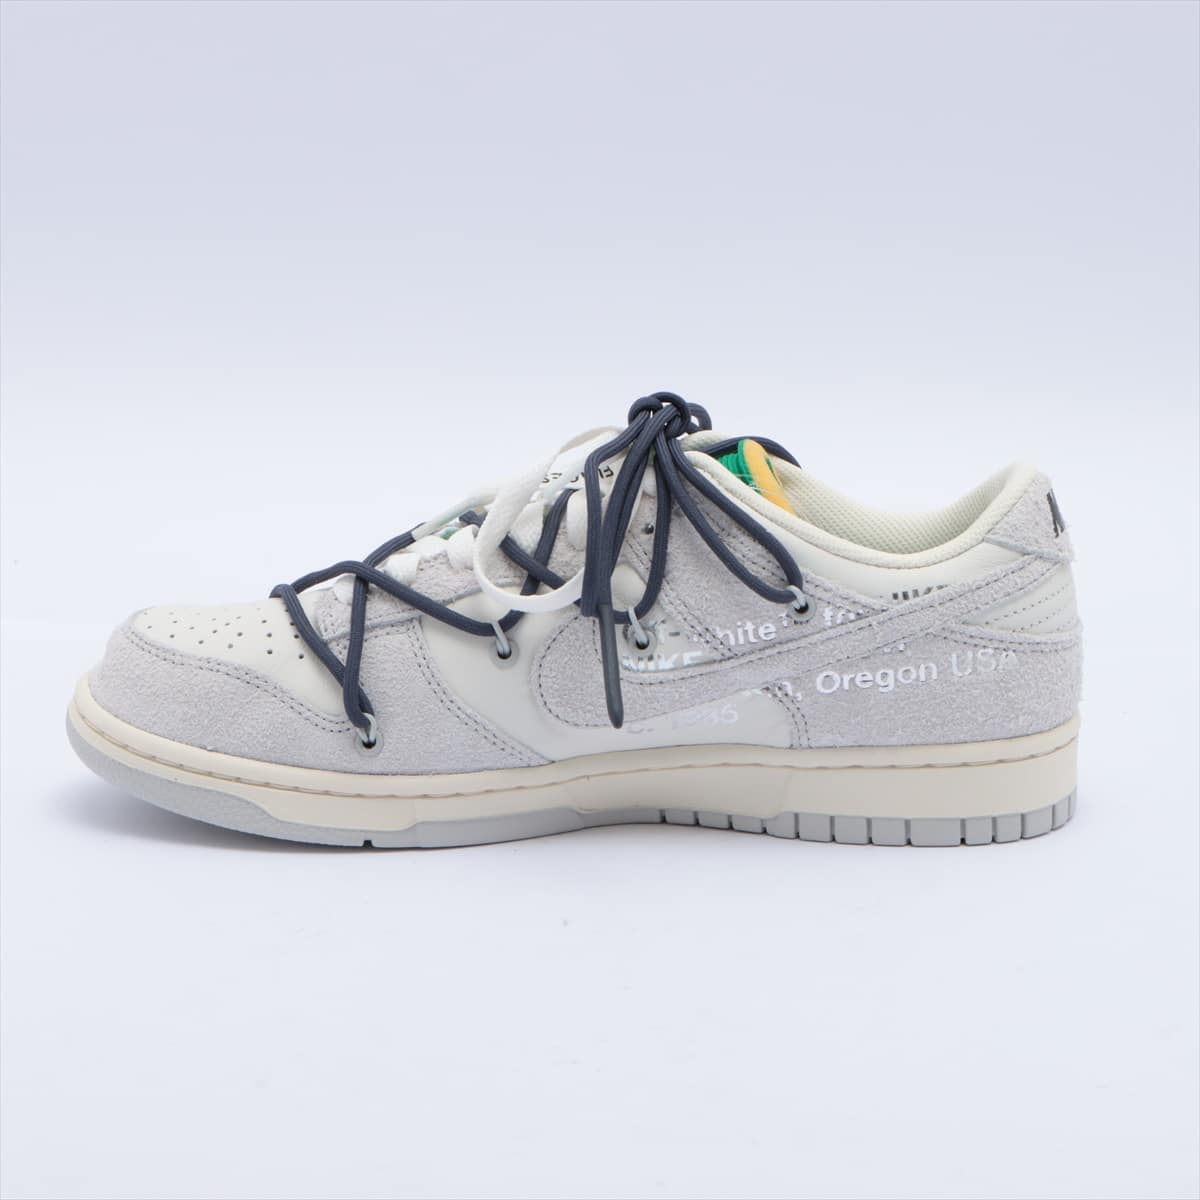 NIKE × OFF-WHITE Leather Sneakers 27.5cm Men's Gray x green Dunk Low The 50 Collection 1 of 50 